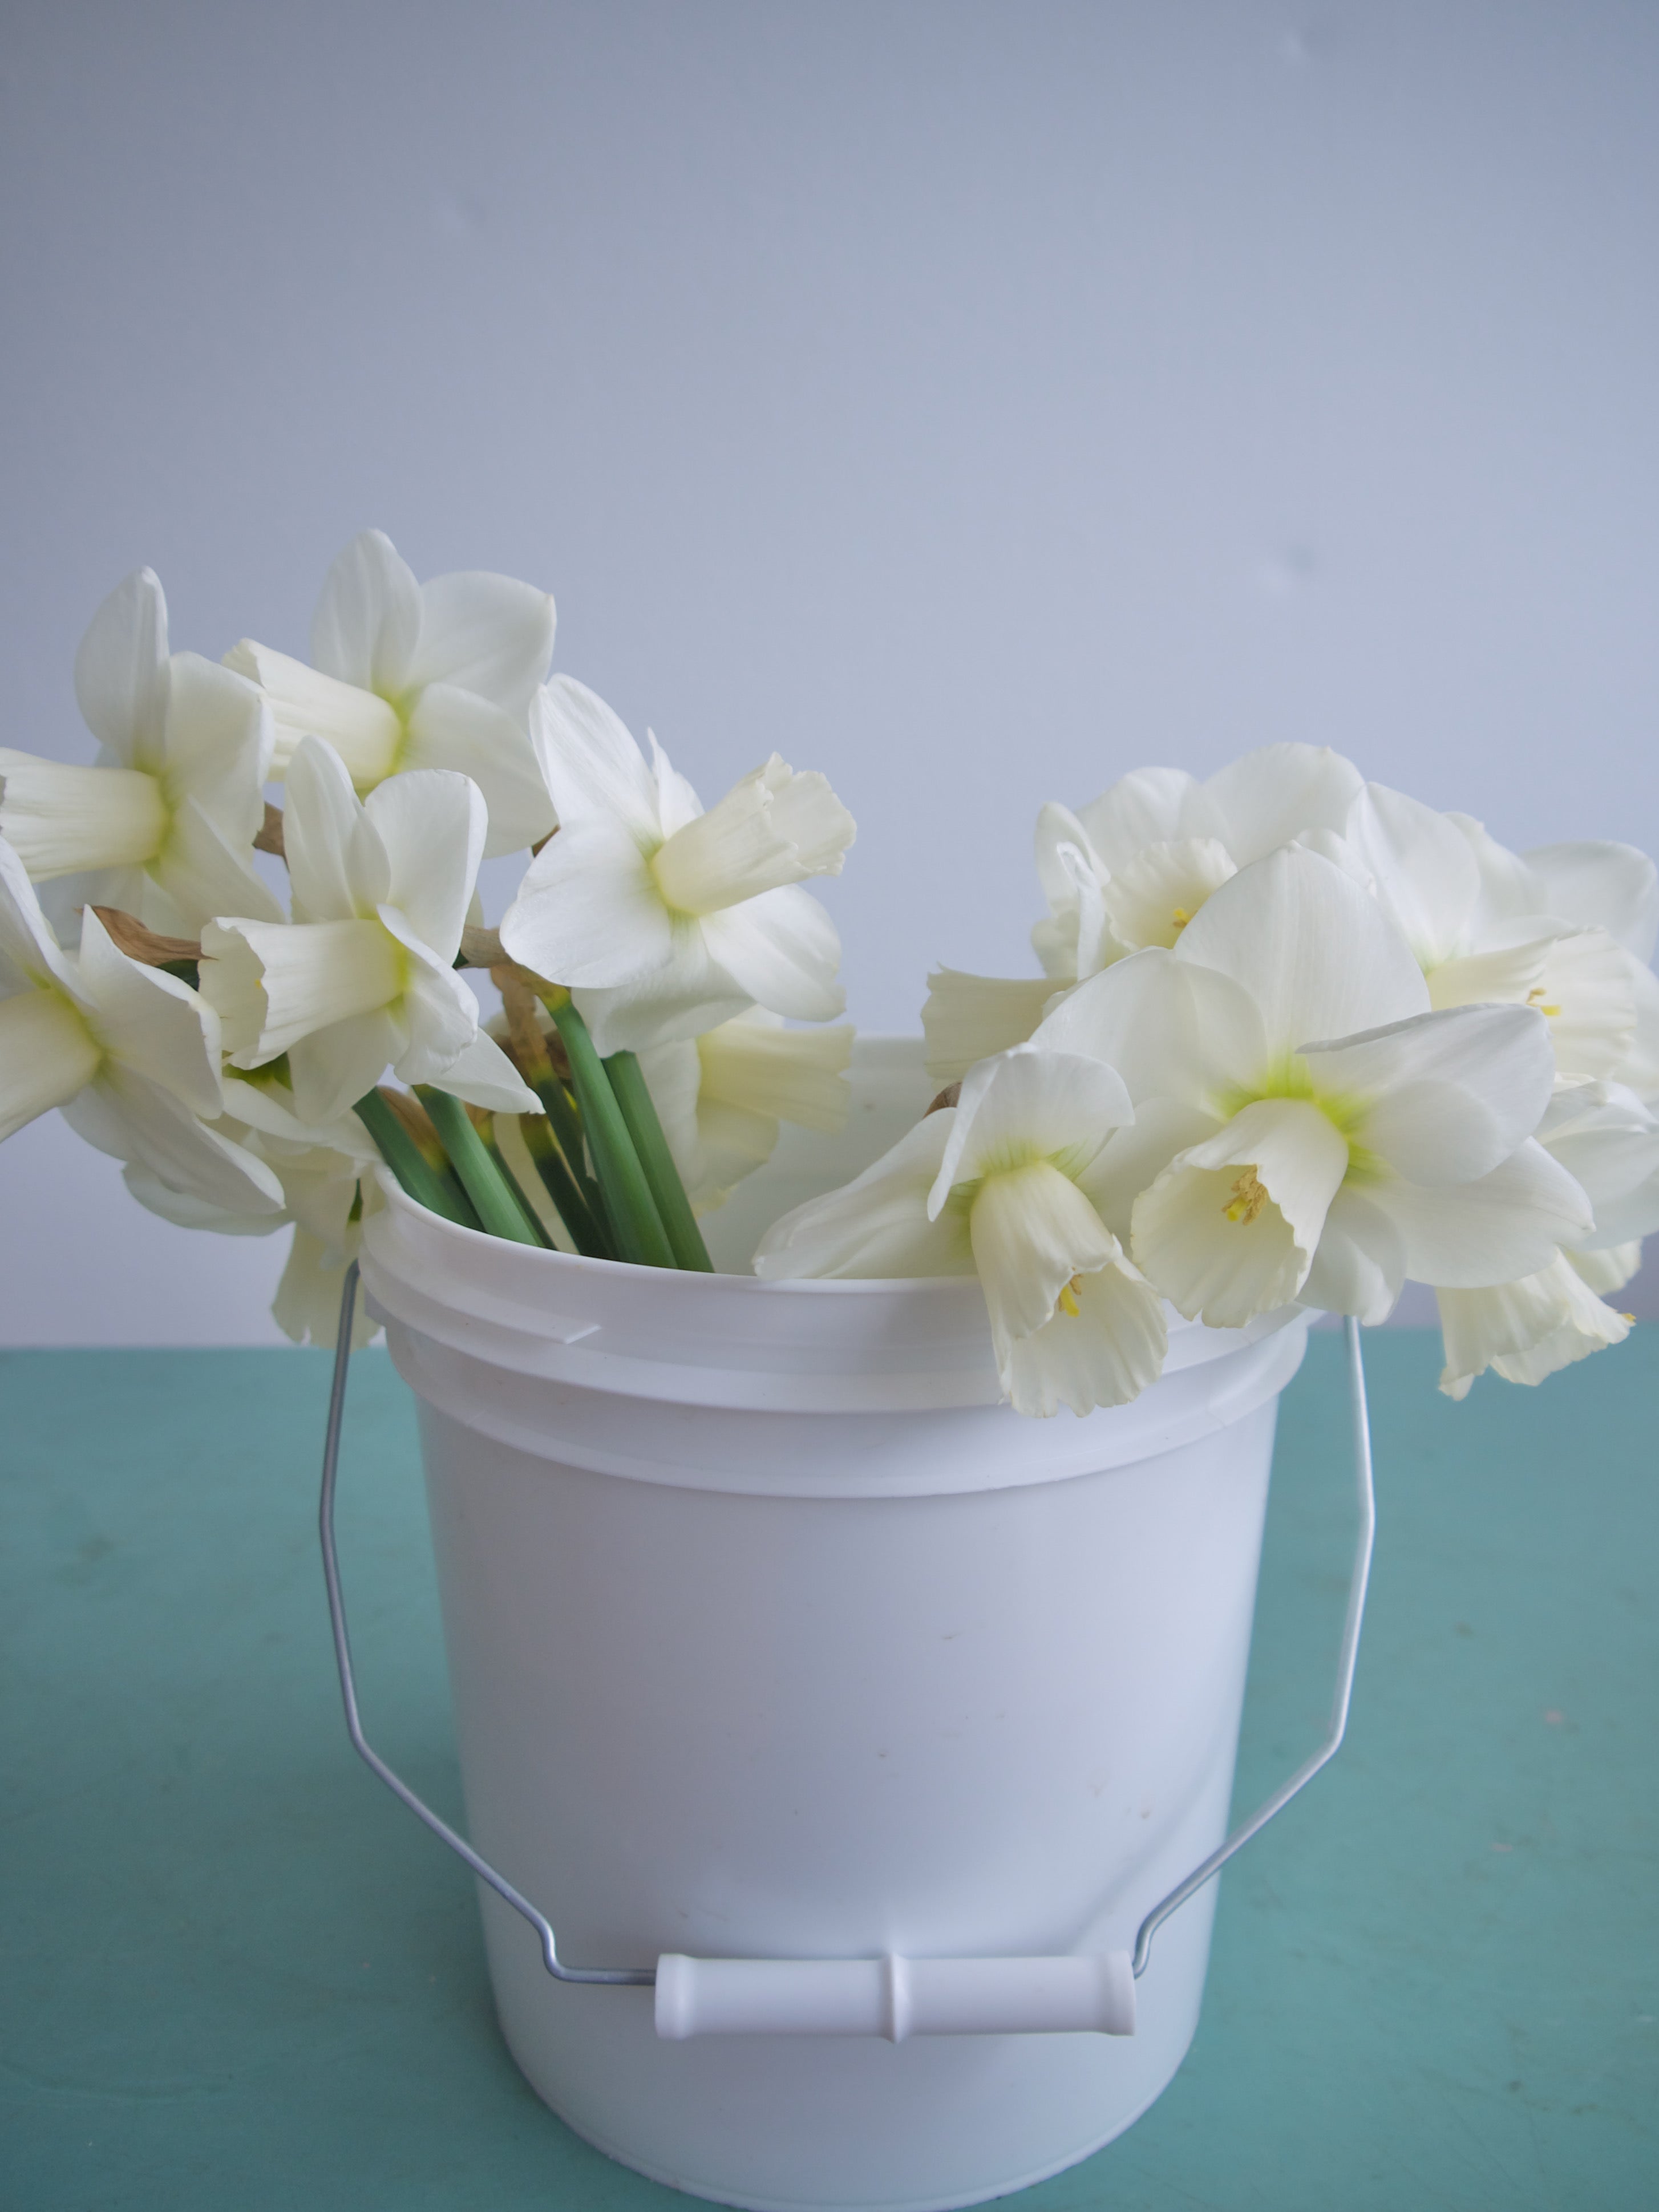 Daffodils. Send Easter flowers. Vancouver flower delivery. Portland flower delivery. 